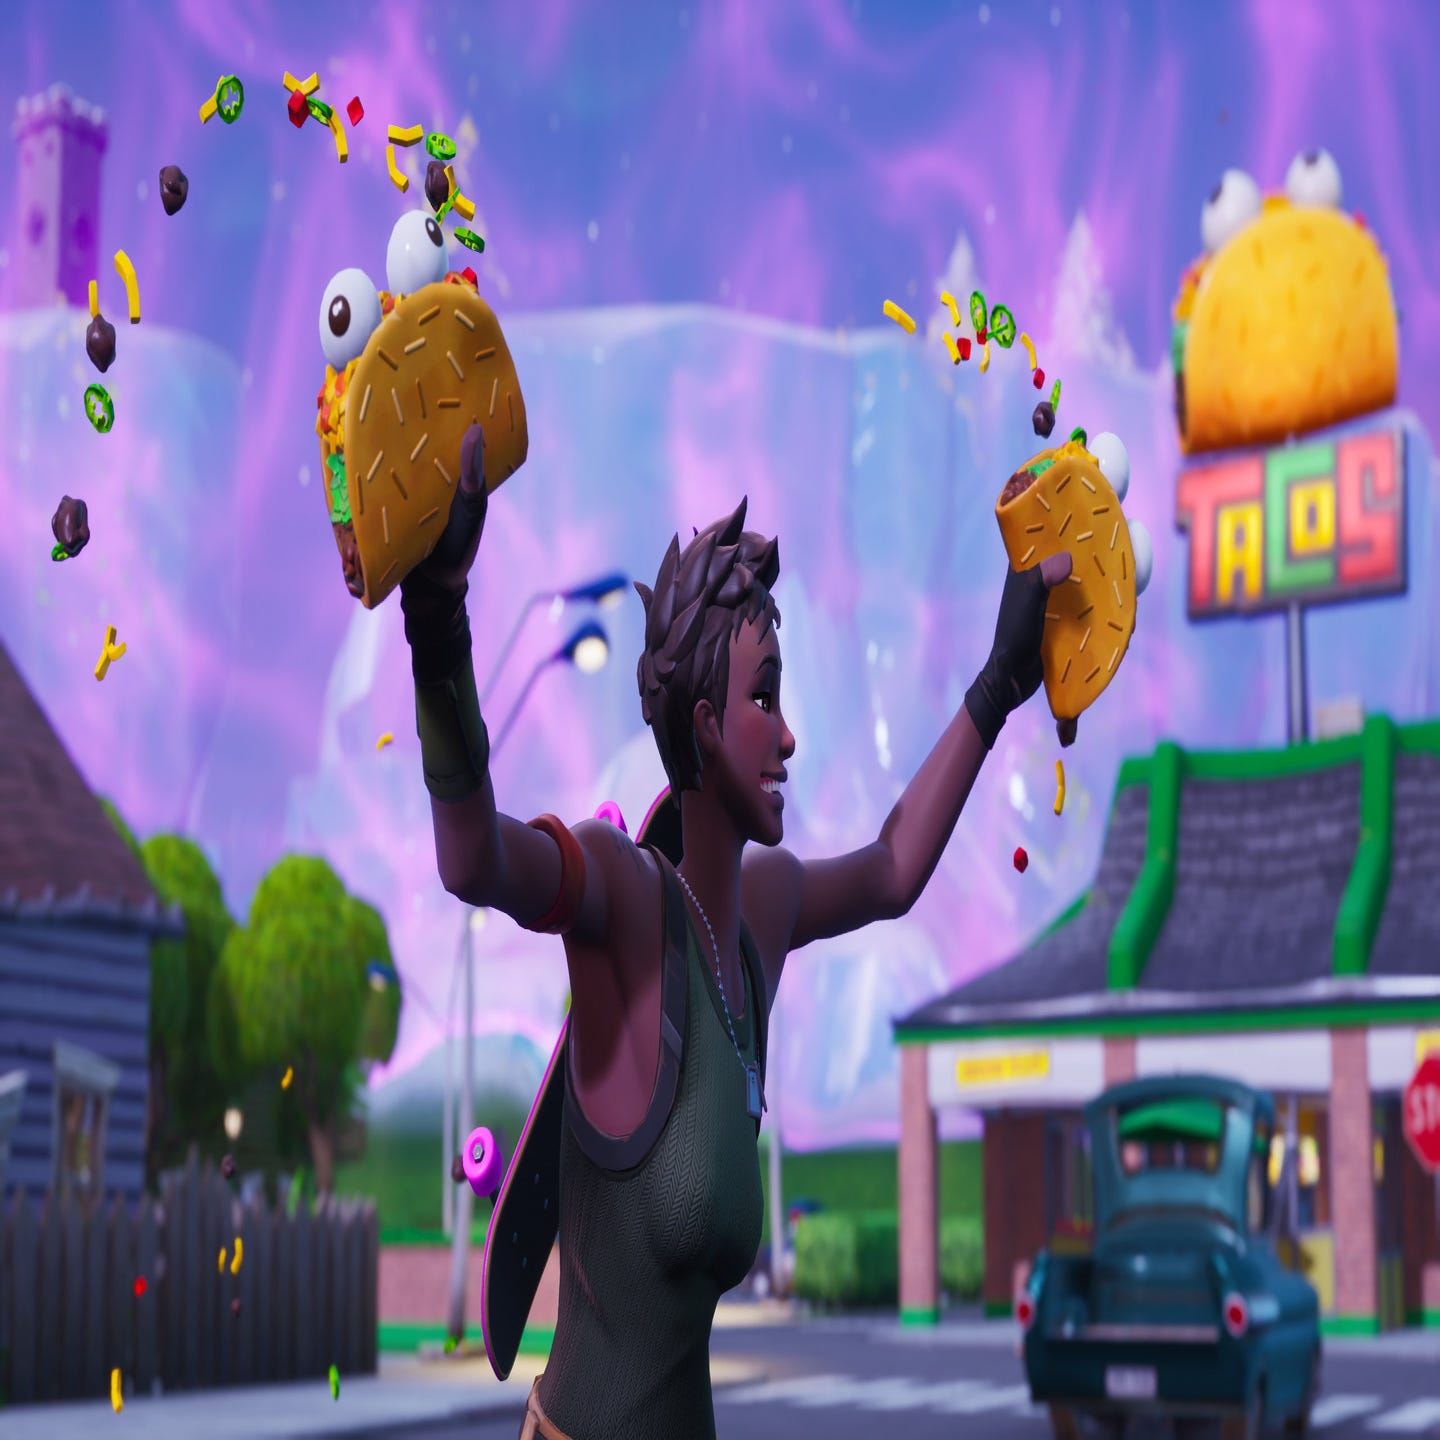 fortnite-tacos.jpg?width=1920&height=1920&fit=bounds&quality=80&format=jpg&auto=webp